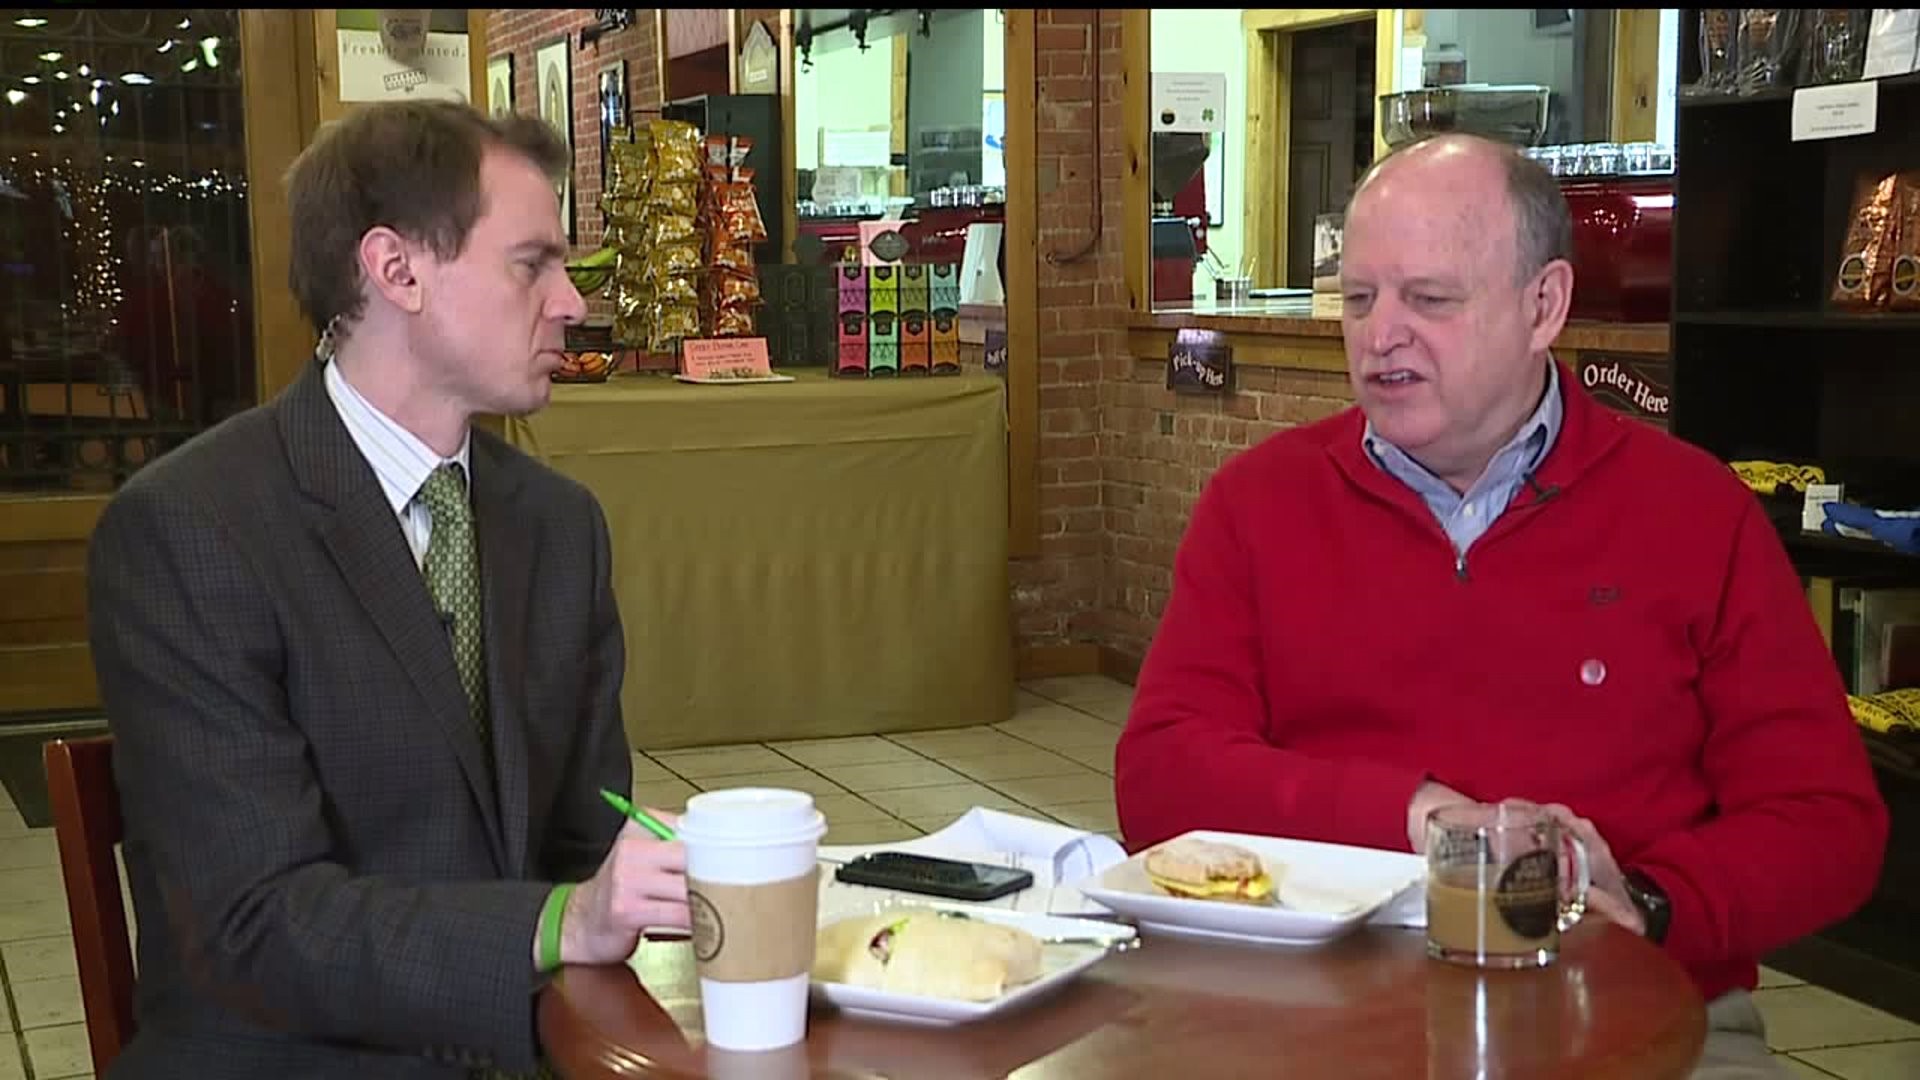 Local Illinois Republican: Governor Rauner has a `broader appeal`